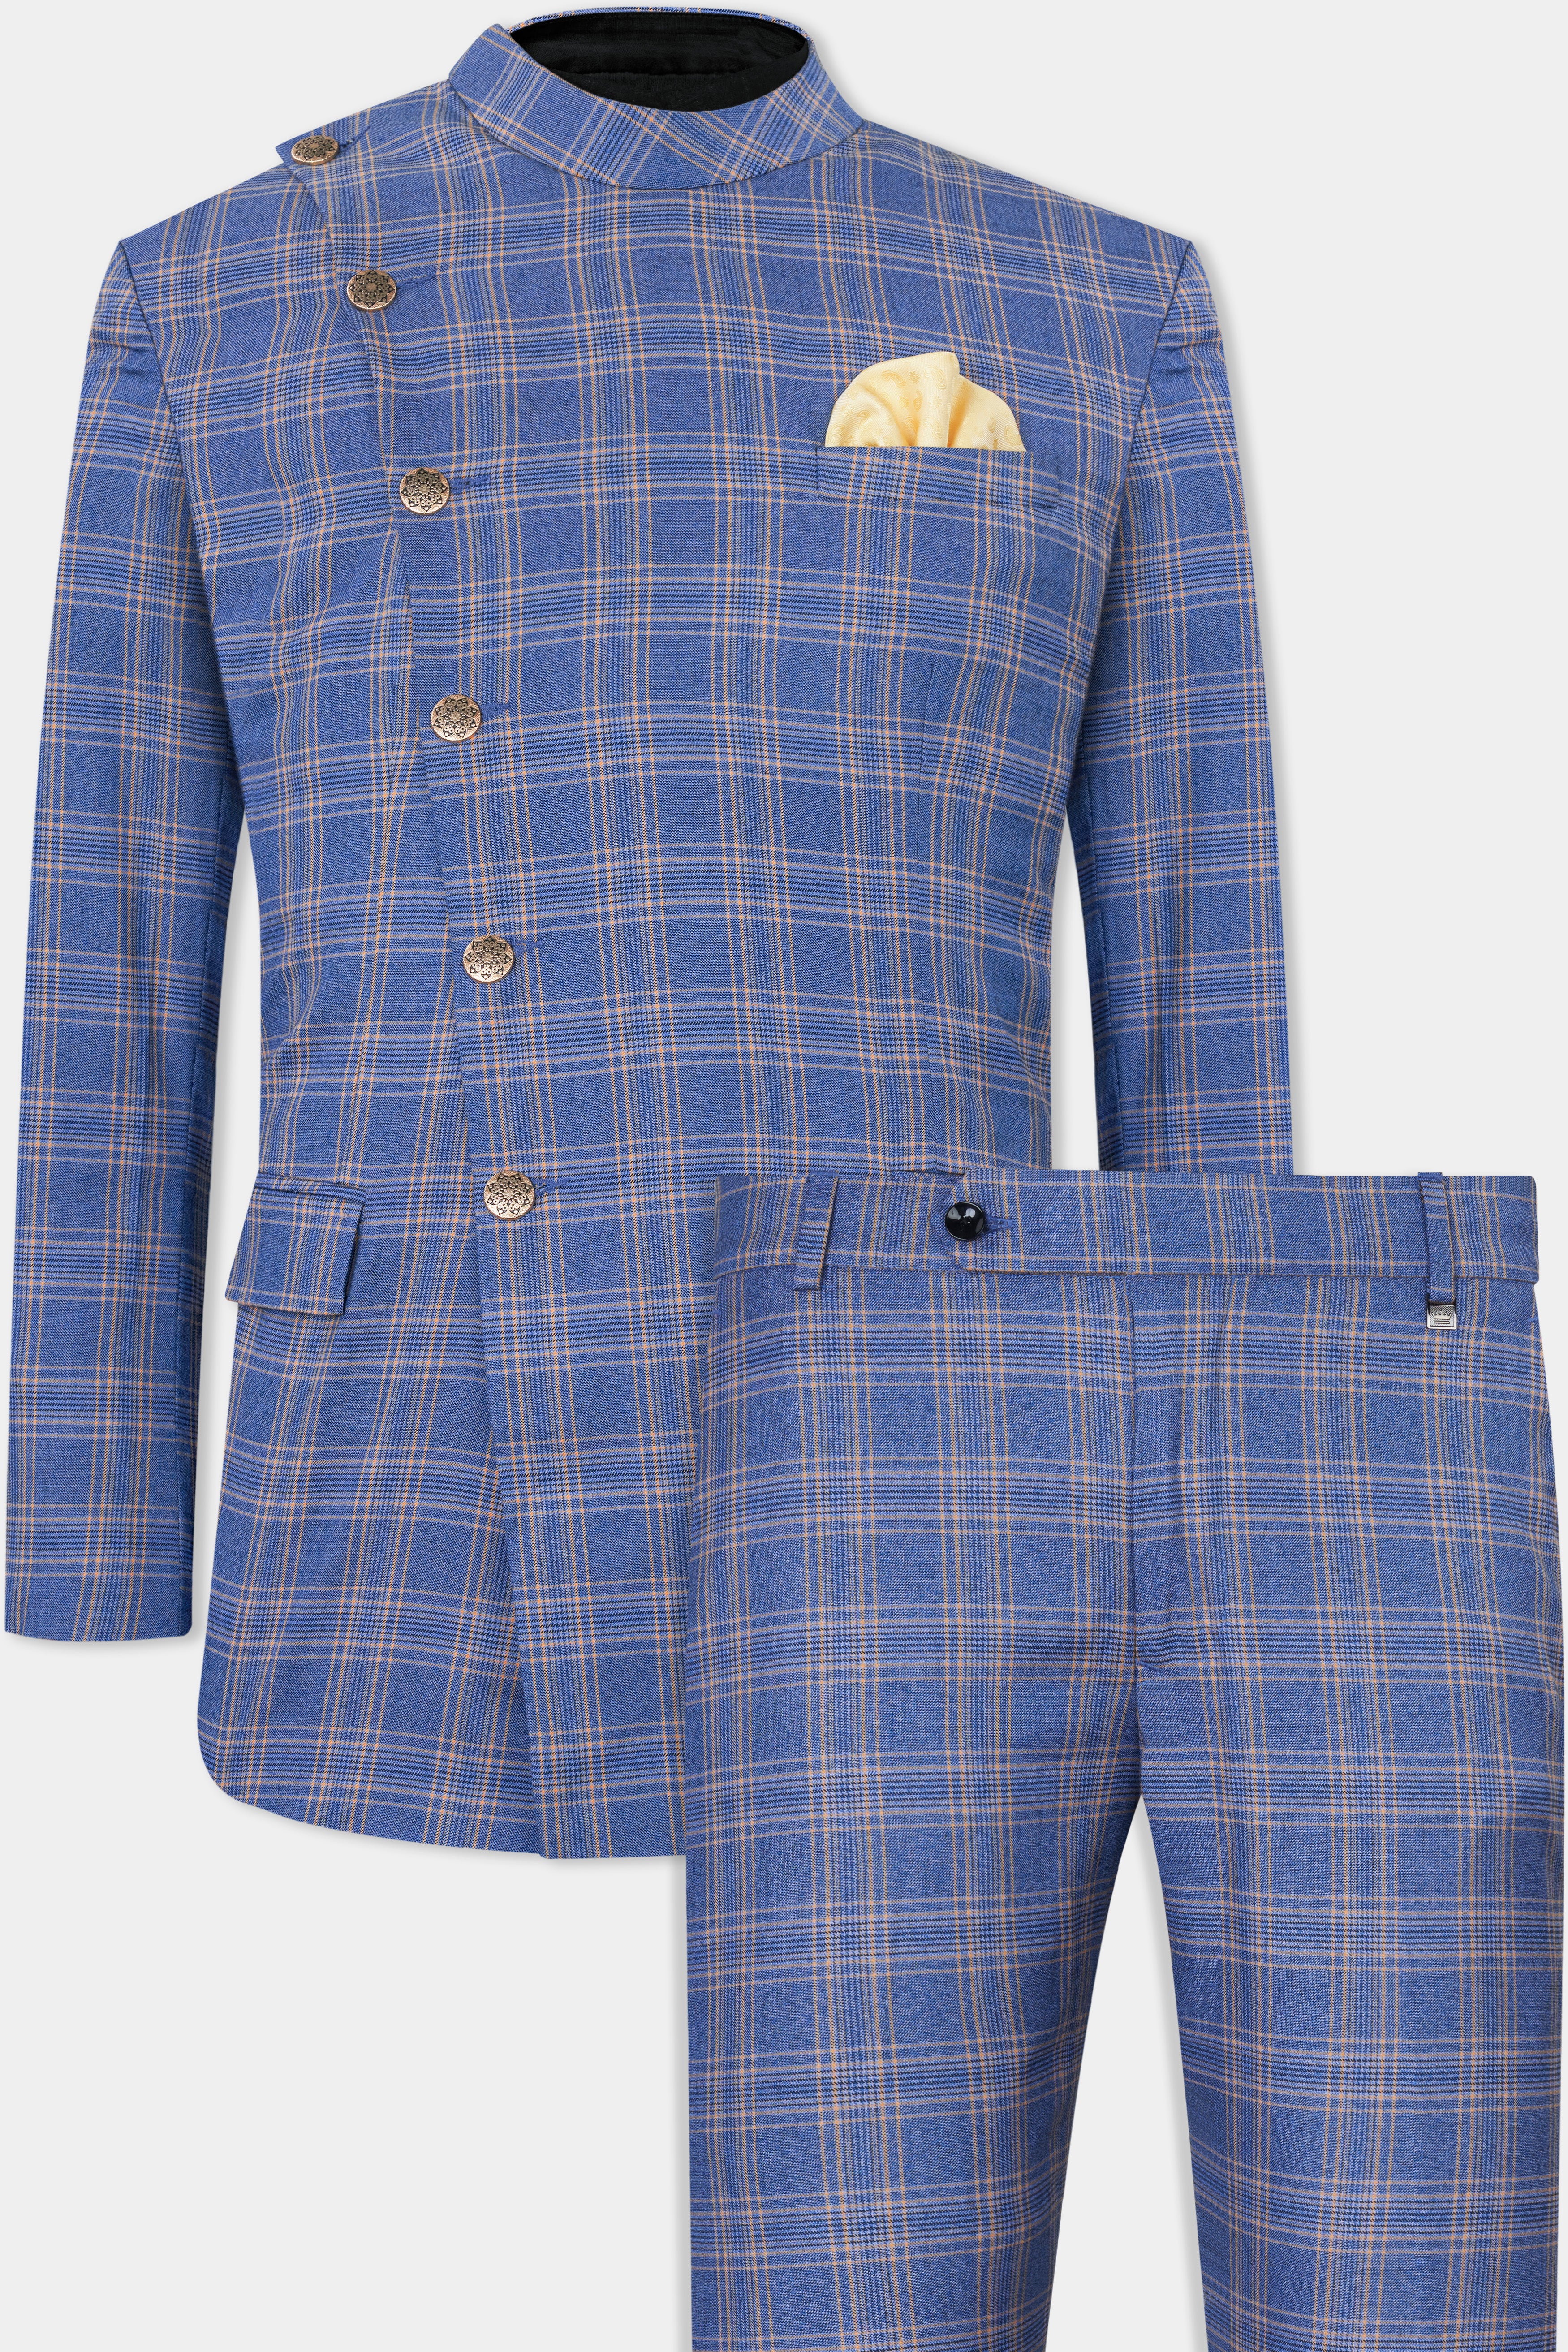 Scampi Blue and Muesli Brown Plaid Wool Rich Cross Buttoned Bandhgala Suit ST2771-CBG2-36,ST2771-CBG2-38,ST2771-CBG2-40,ST2771-CBG2-42,ST2771-CBG2-44,ST2771-CBG2-46,ST2771-CBG2-48,ST2771-CBG2-50,ST2771-CBG2-52,ST2771-CBG2-54,ST2771-CBG2-56,ST2771-CBG2-58,ST2771-CBG2-60